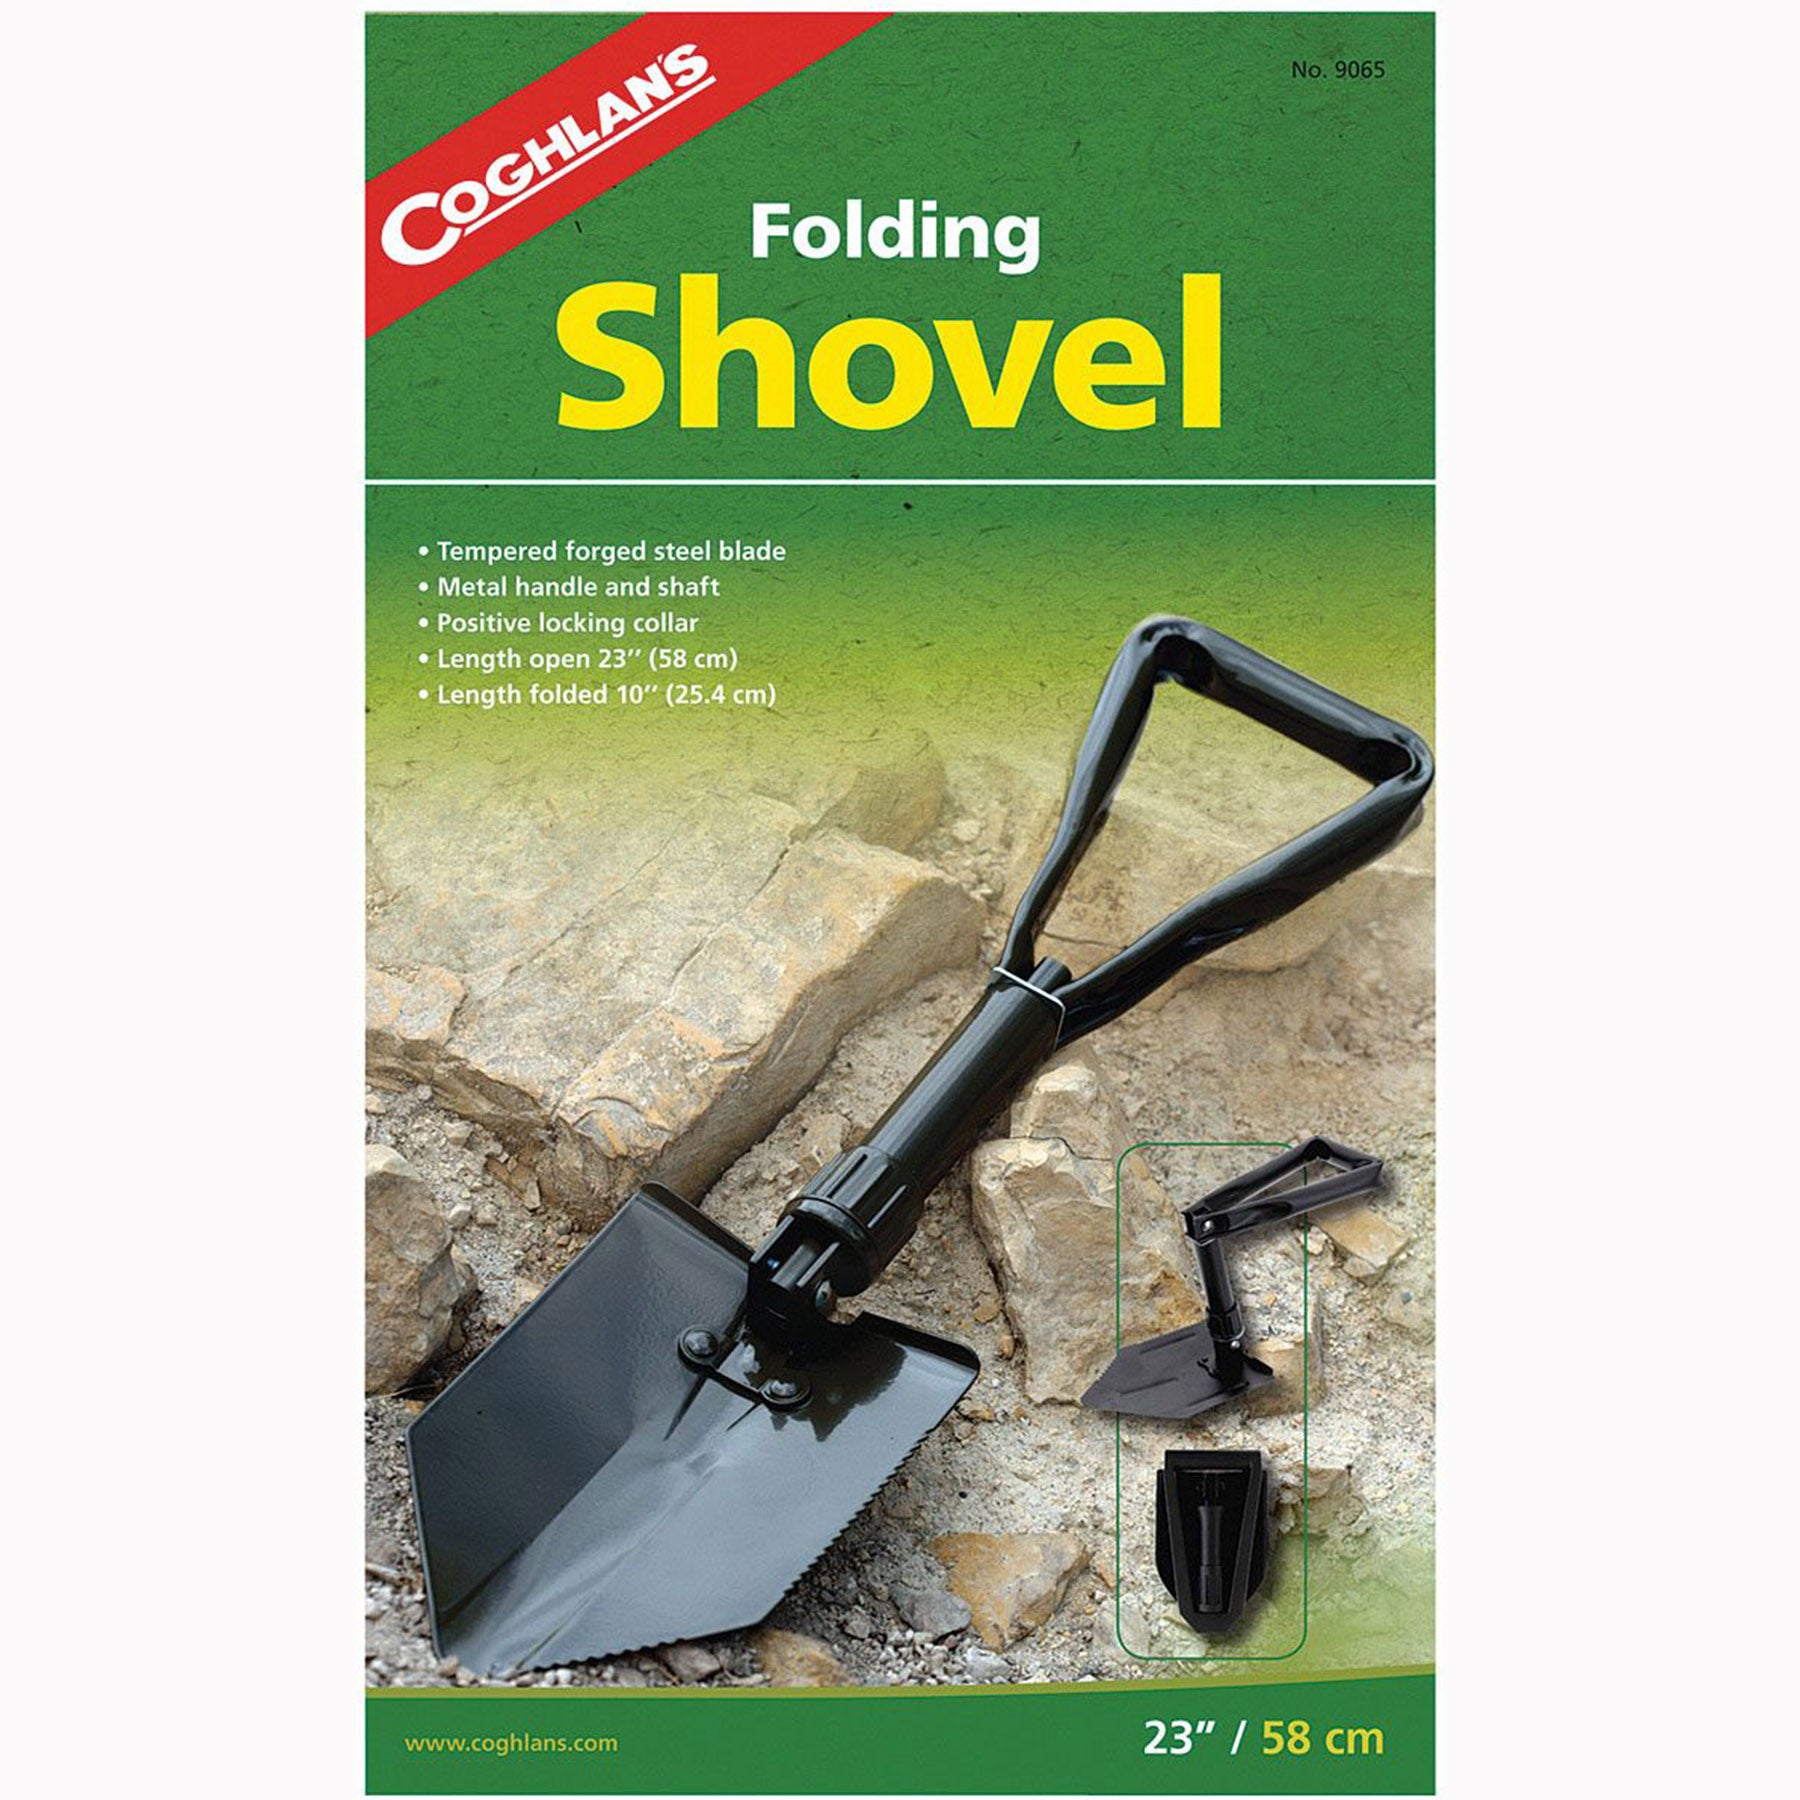 a photo of a photo of the package of the folding shovel